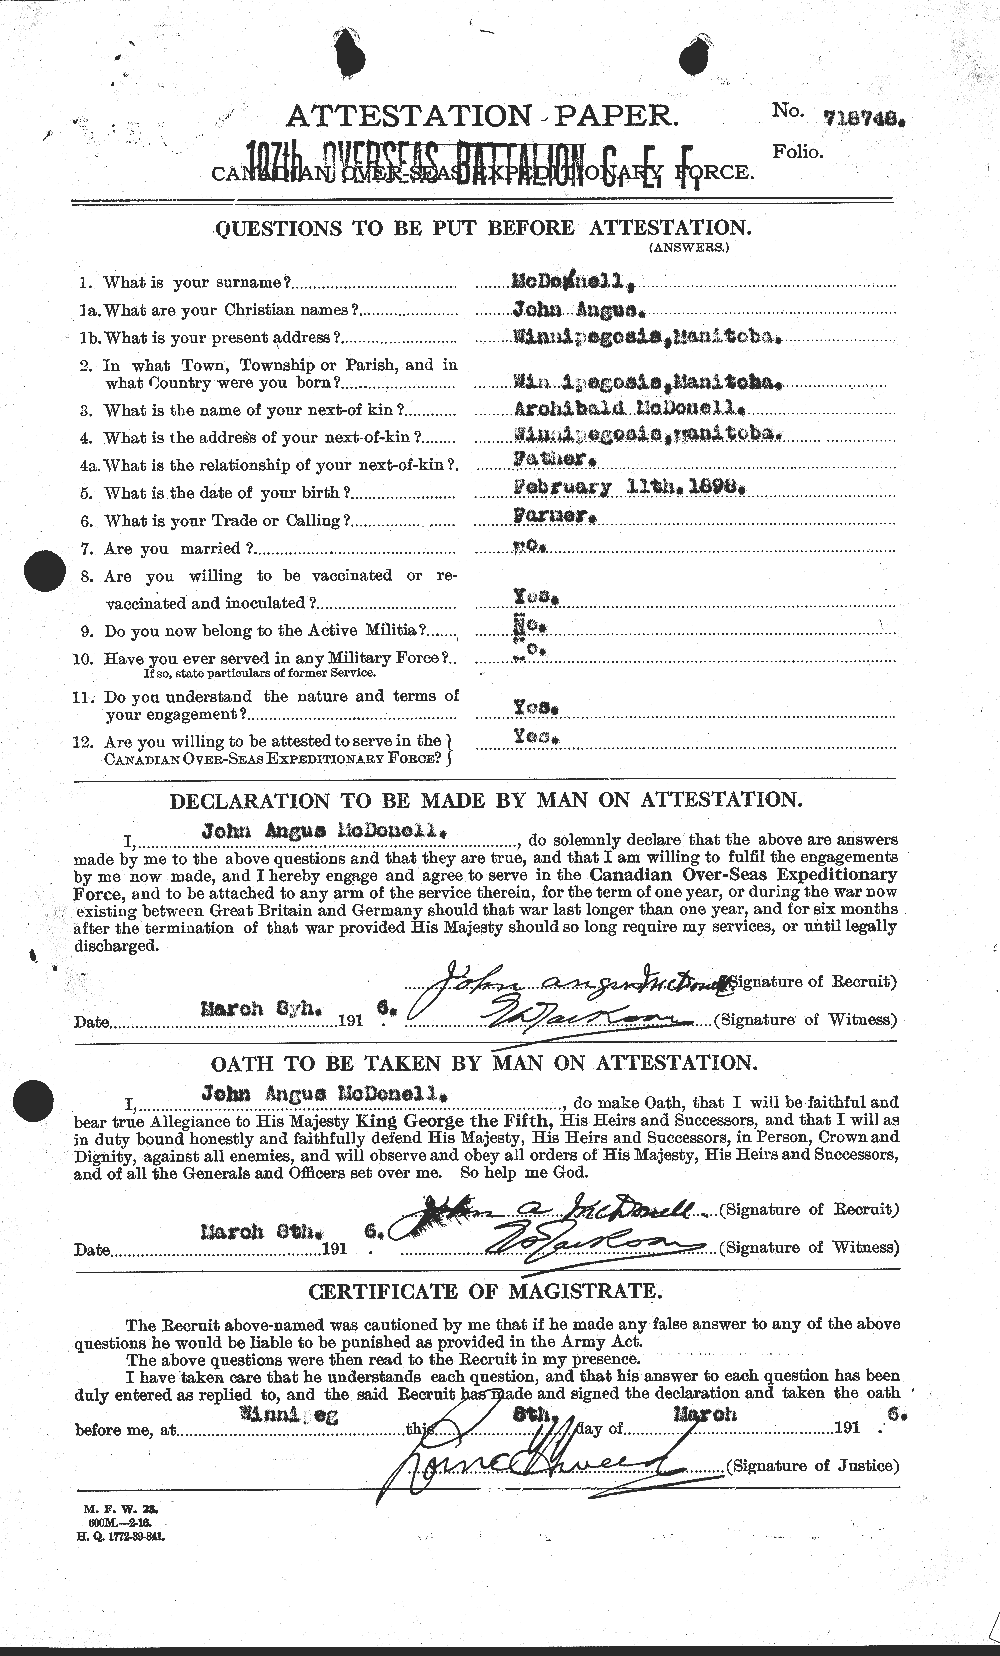 Personnel Records of the First World War - CEF 521464a